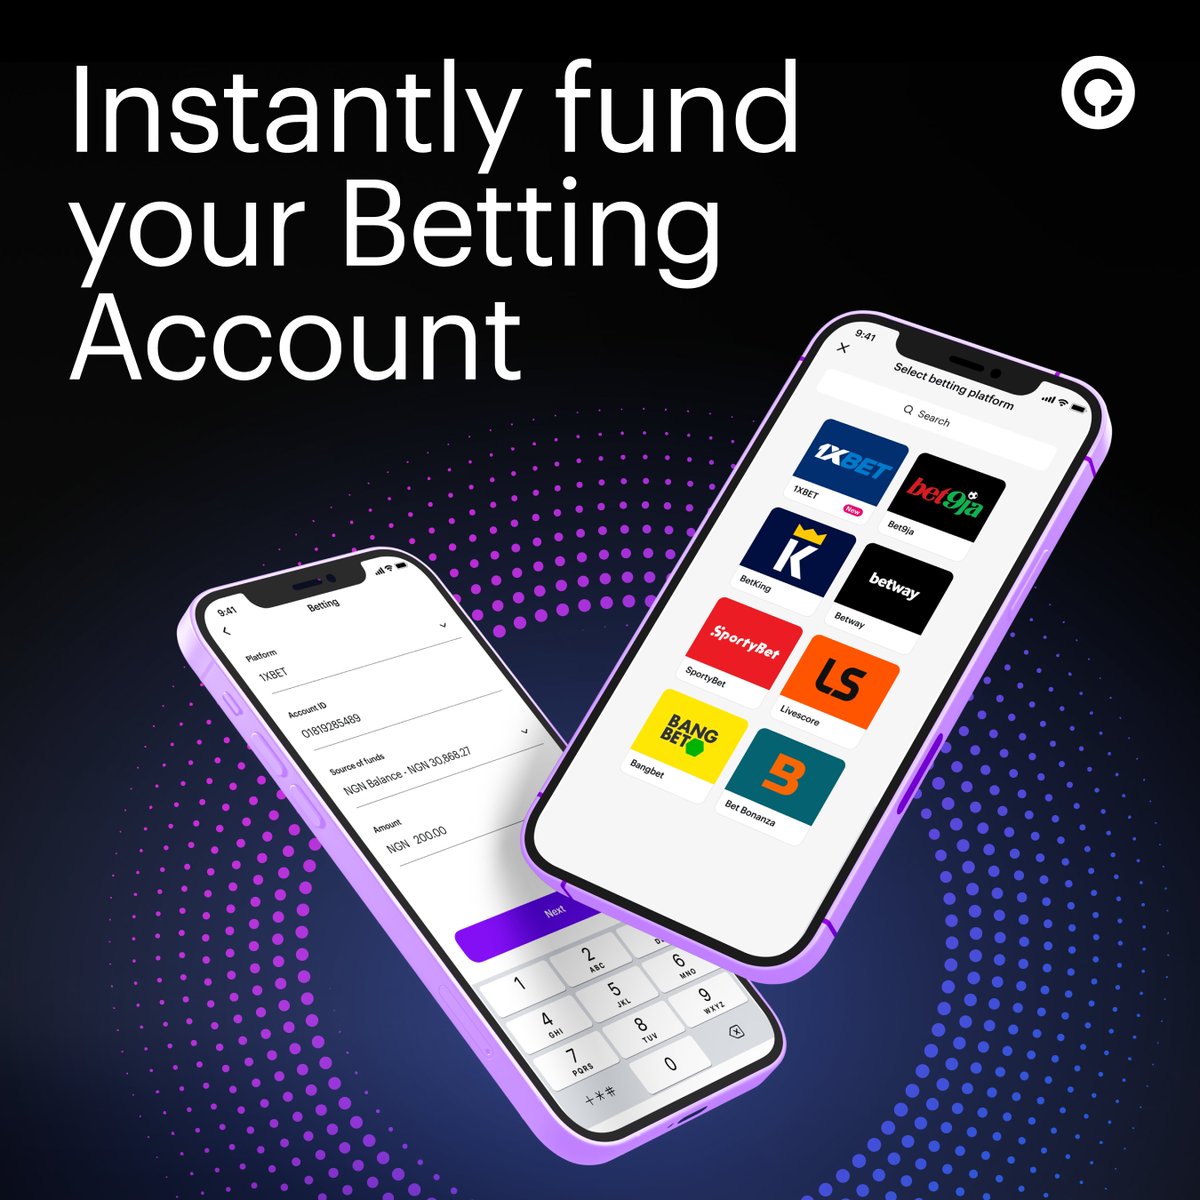 With Chipper, you can effortlessly fund your favorite betting platforms such as 1xBet, Betway, Bet9ja, MerryBet, NaijaBet, and more. ⚽️💳 Get the weekend started with hassle-free transactions! #ChipperCash